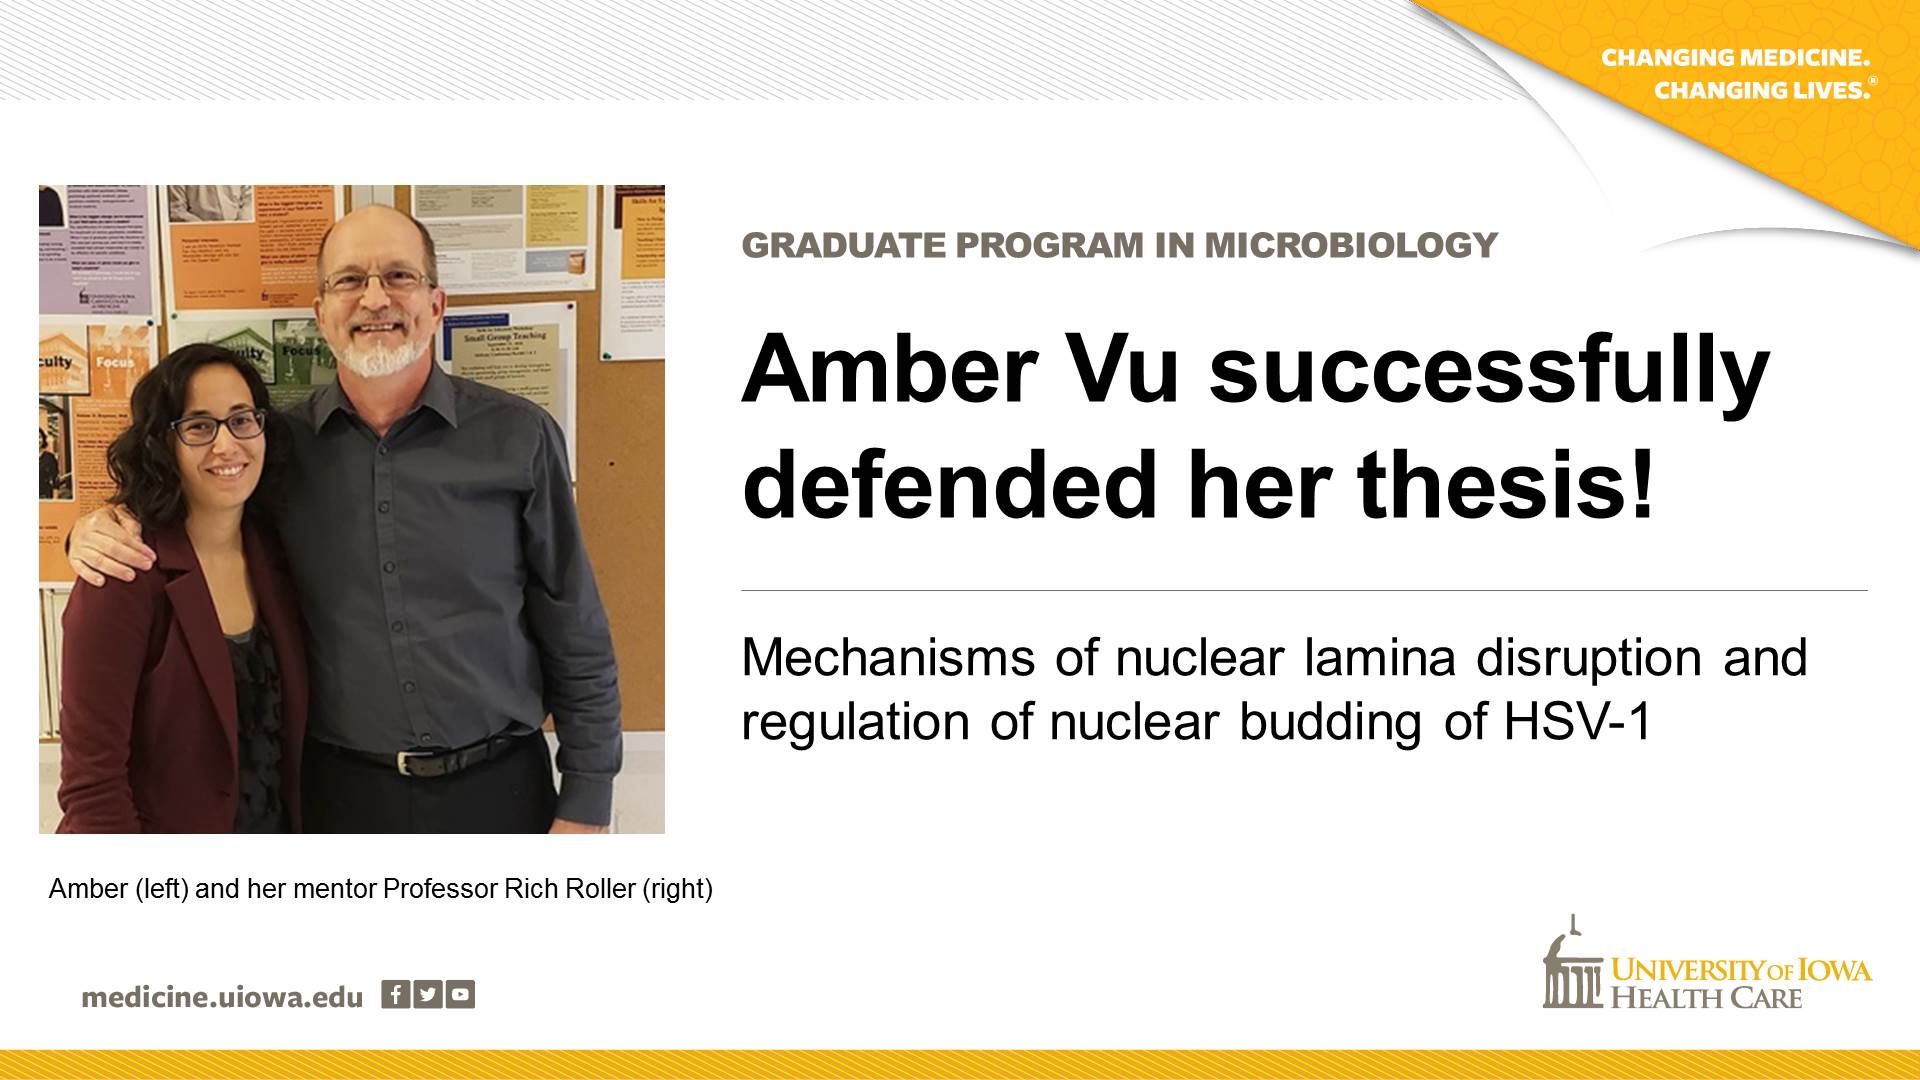 Amber Vu successfully defended her thesis!